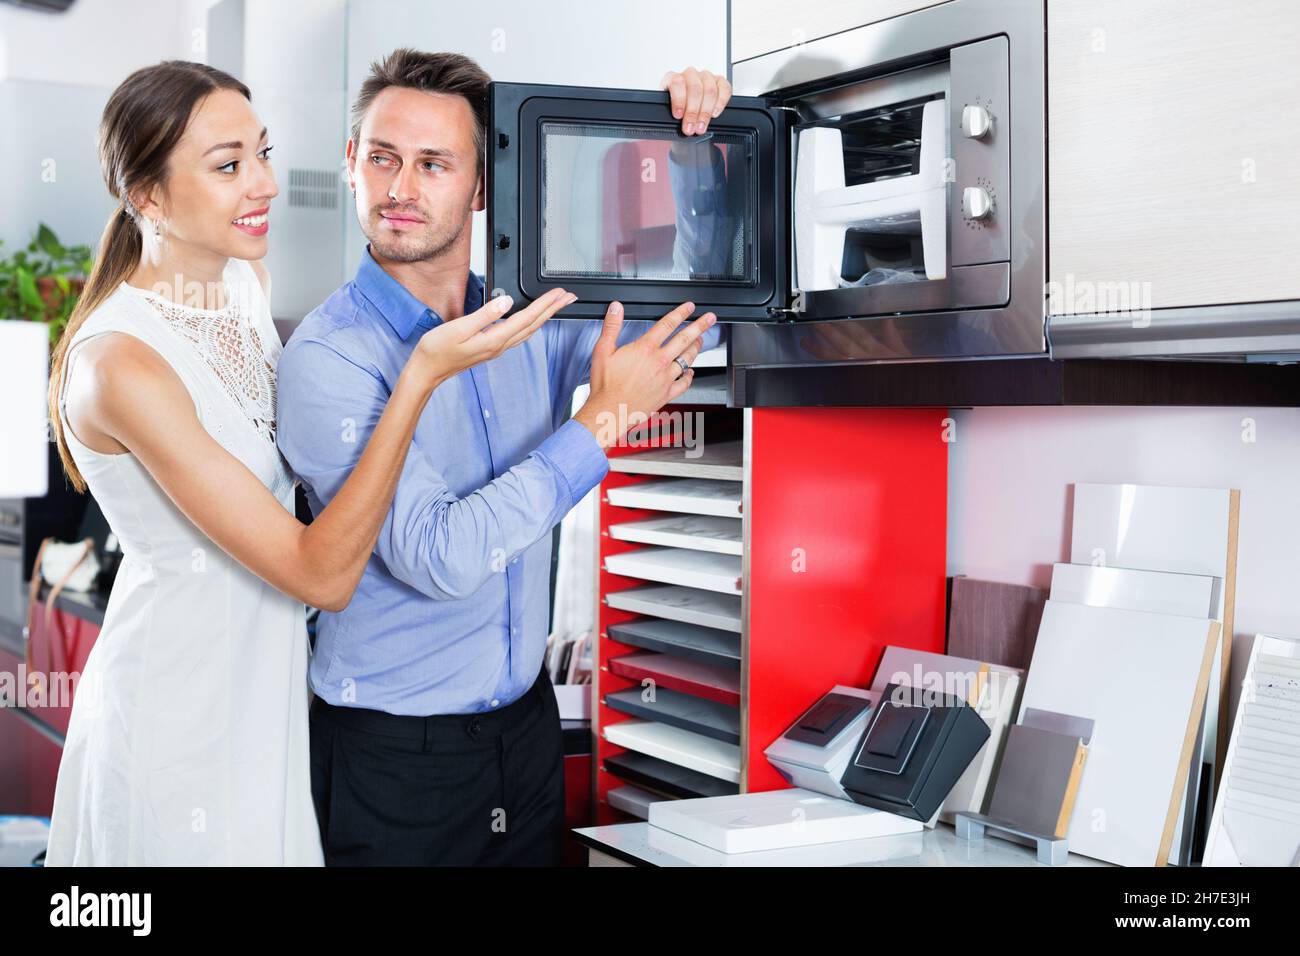 Couple choosing microwave in household appliance section Stock Photo